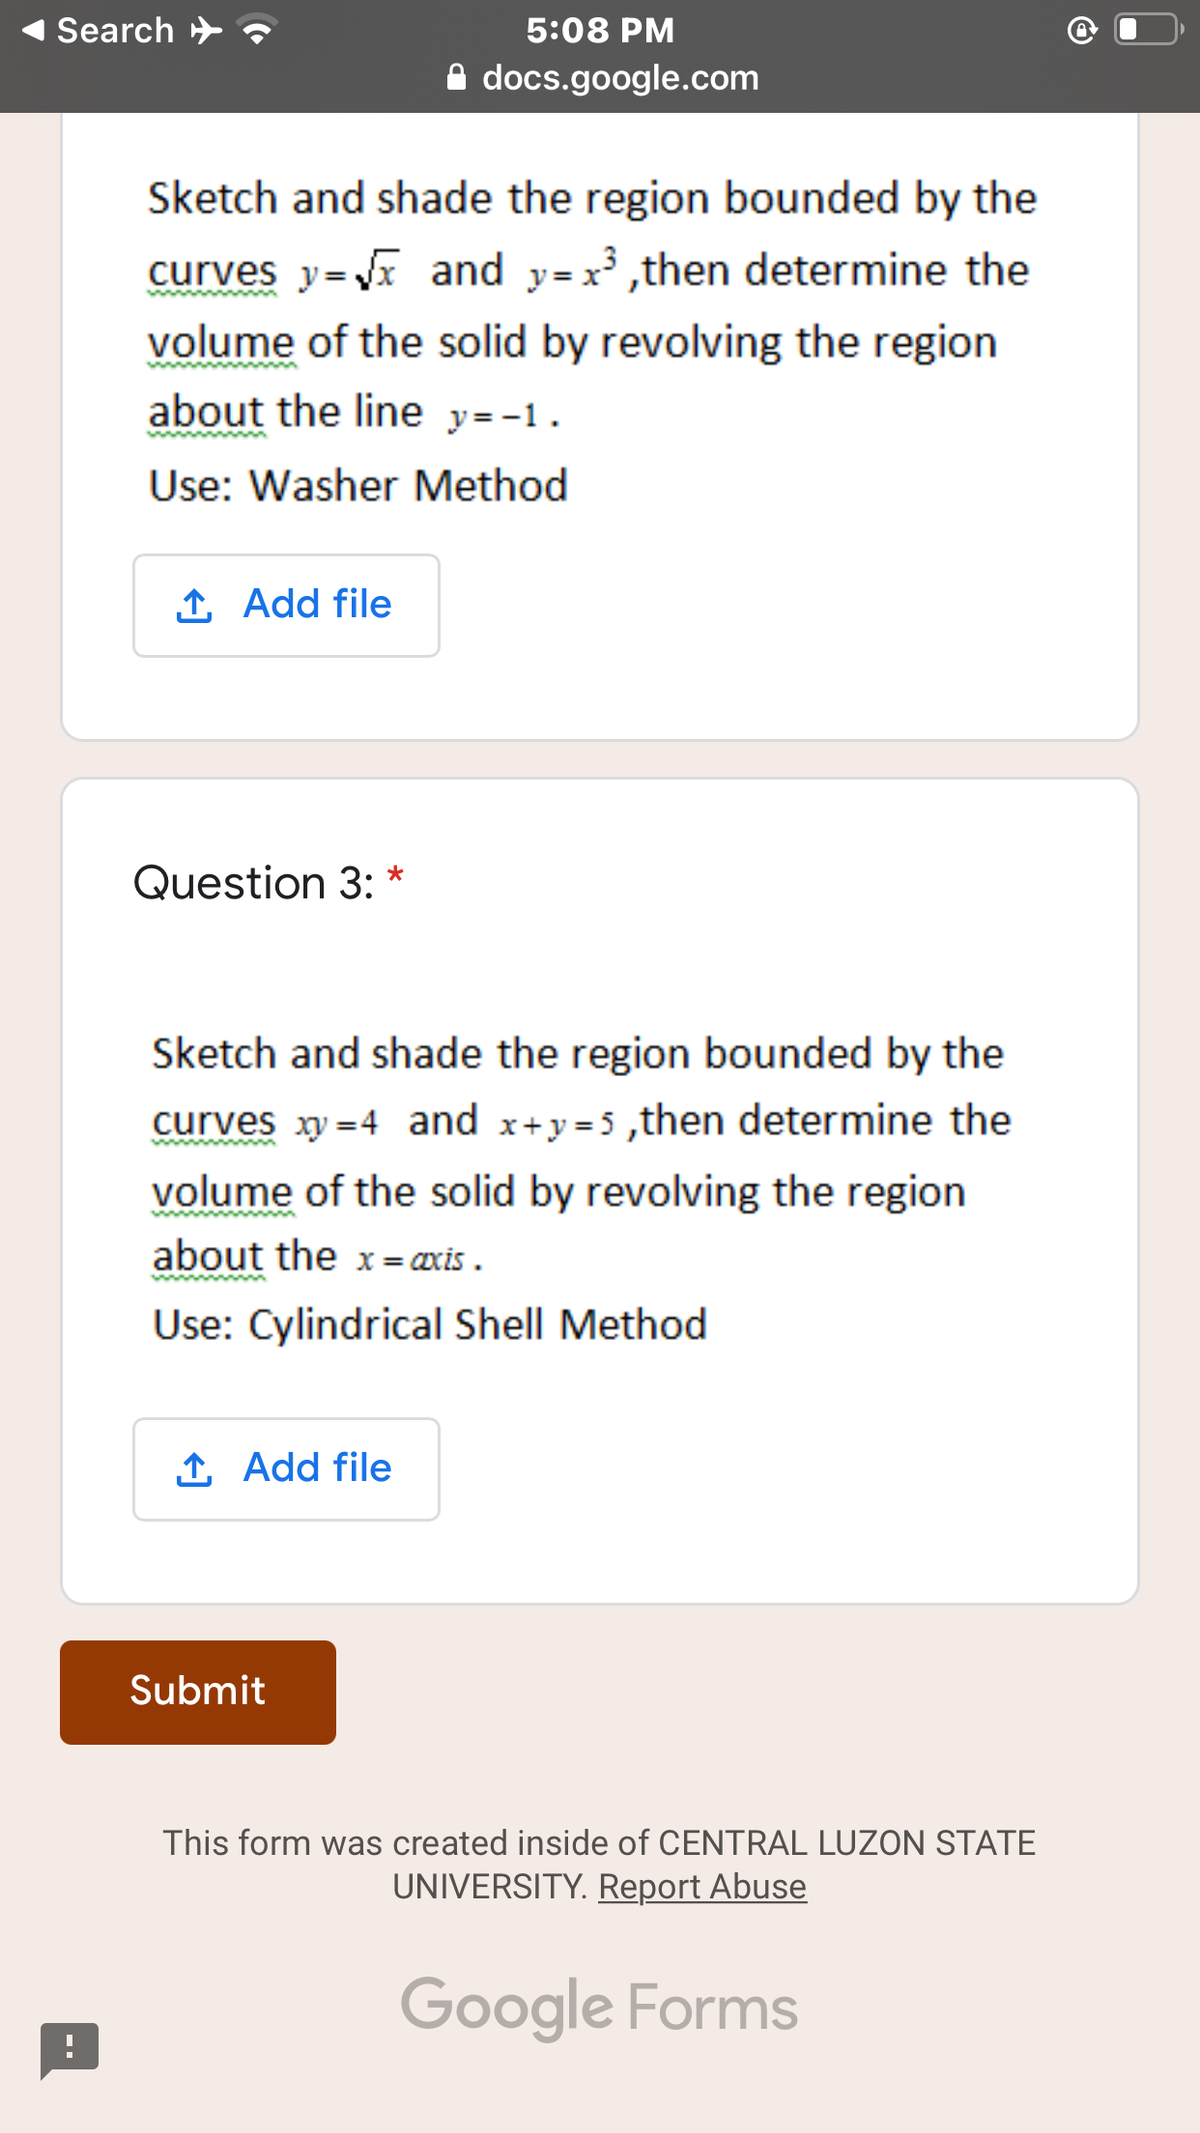 Search >
5:08 PM
A docs.google.com
Sketch and shade the region bounded by the
curves y=x and y=x³ ,then determine the
volume of the solid by revolving the region
about the line y=-1.
Use: Washer Method
1 Add file
Question 3: *
Sketch and shade the region bounded by the
curves xy =4 and x+y =5 ,then determine the
volume of the solid by revolving the region
about the x = œxis .
Use: Cylindrical Shell Method
1 Add file
Submit
This form was created inside of CENTRAL LUZON STATE
UNIVERSITY. Report Abuse
Google Forms
--
